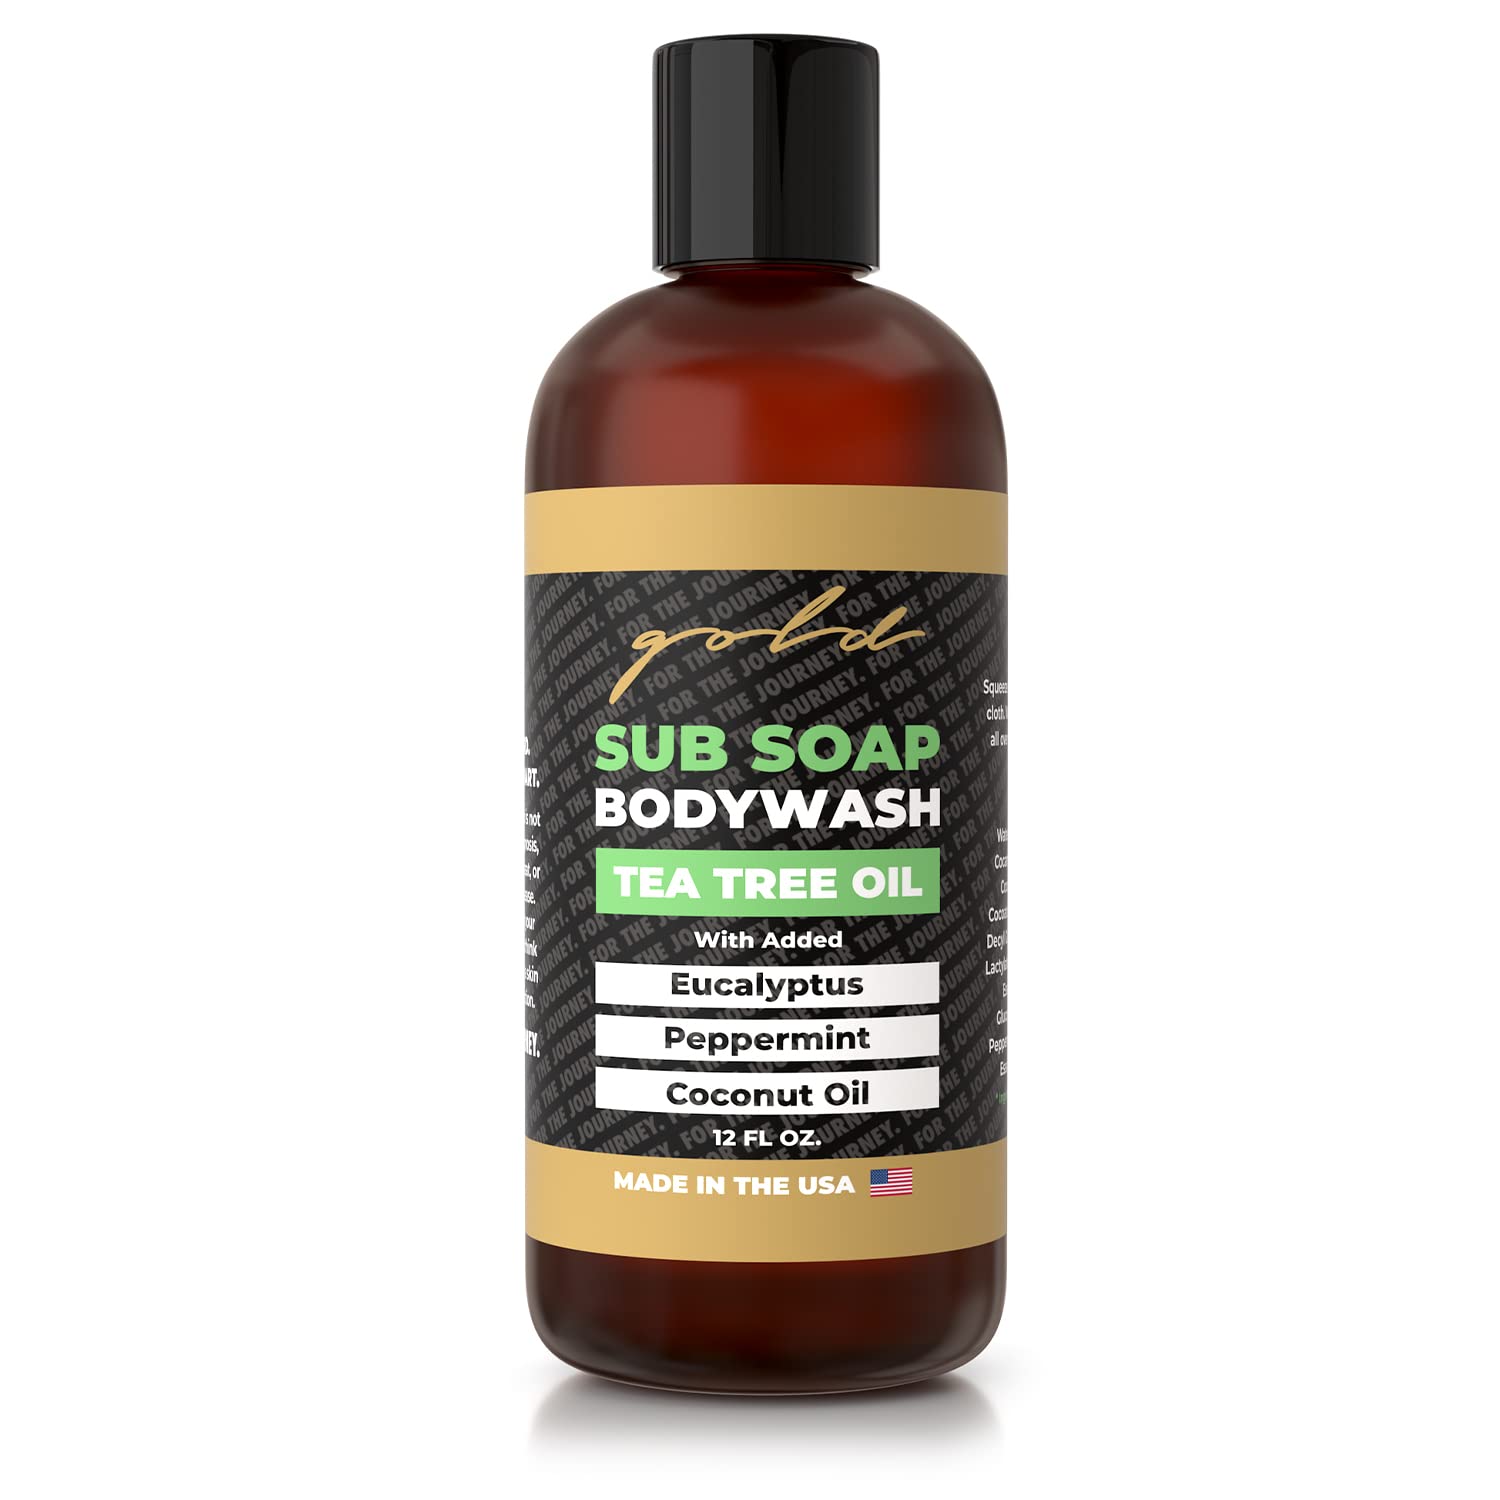 Gold BJJ Submission Soap Body Wash - Shower Gel Packed with Tea Tree Oil for Jiu Jitsu, Wrestling, MMA, and Boxing